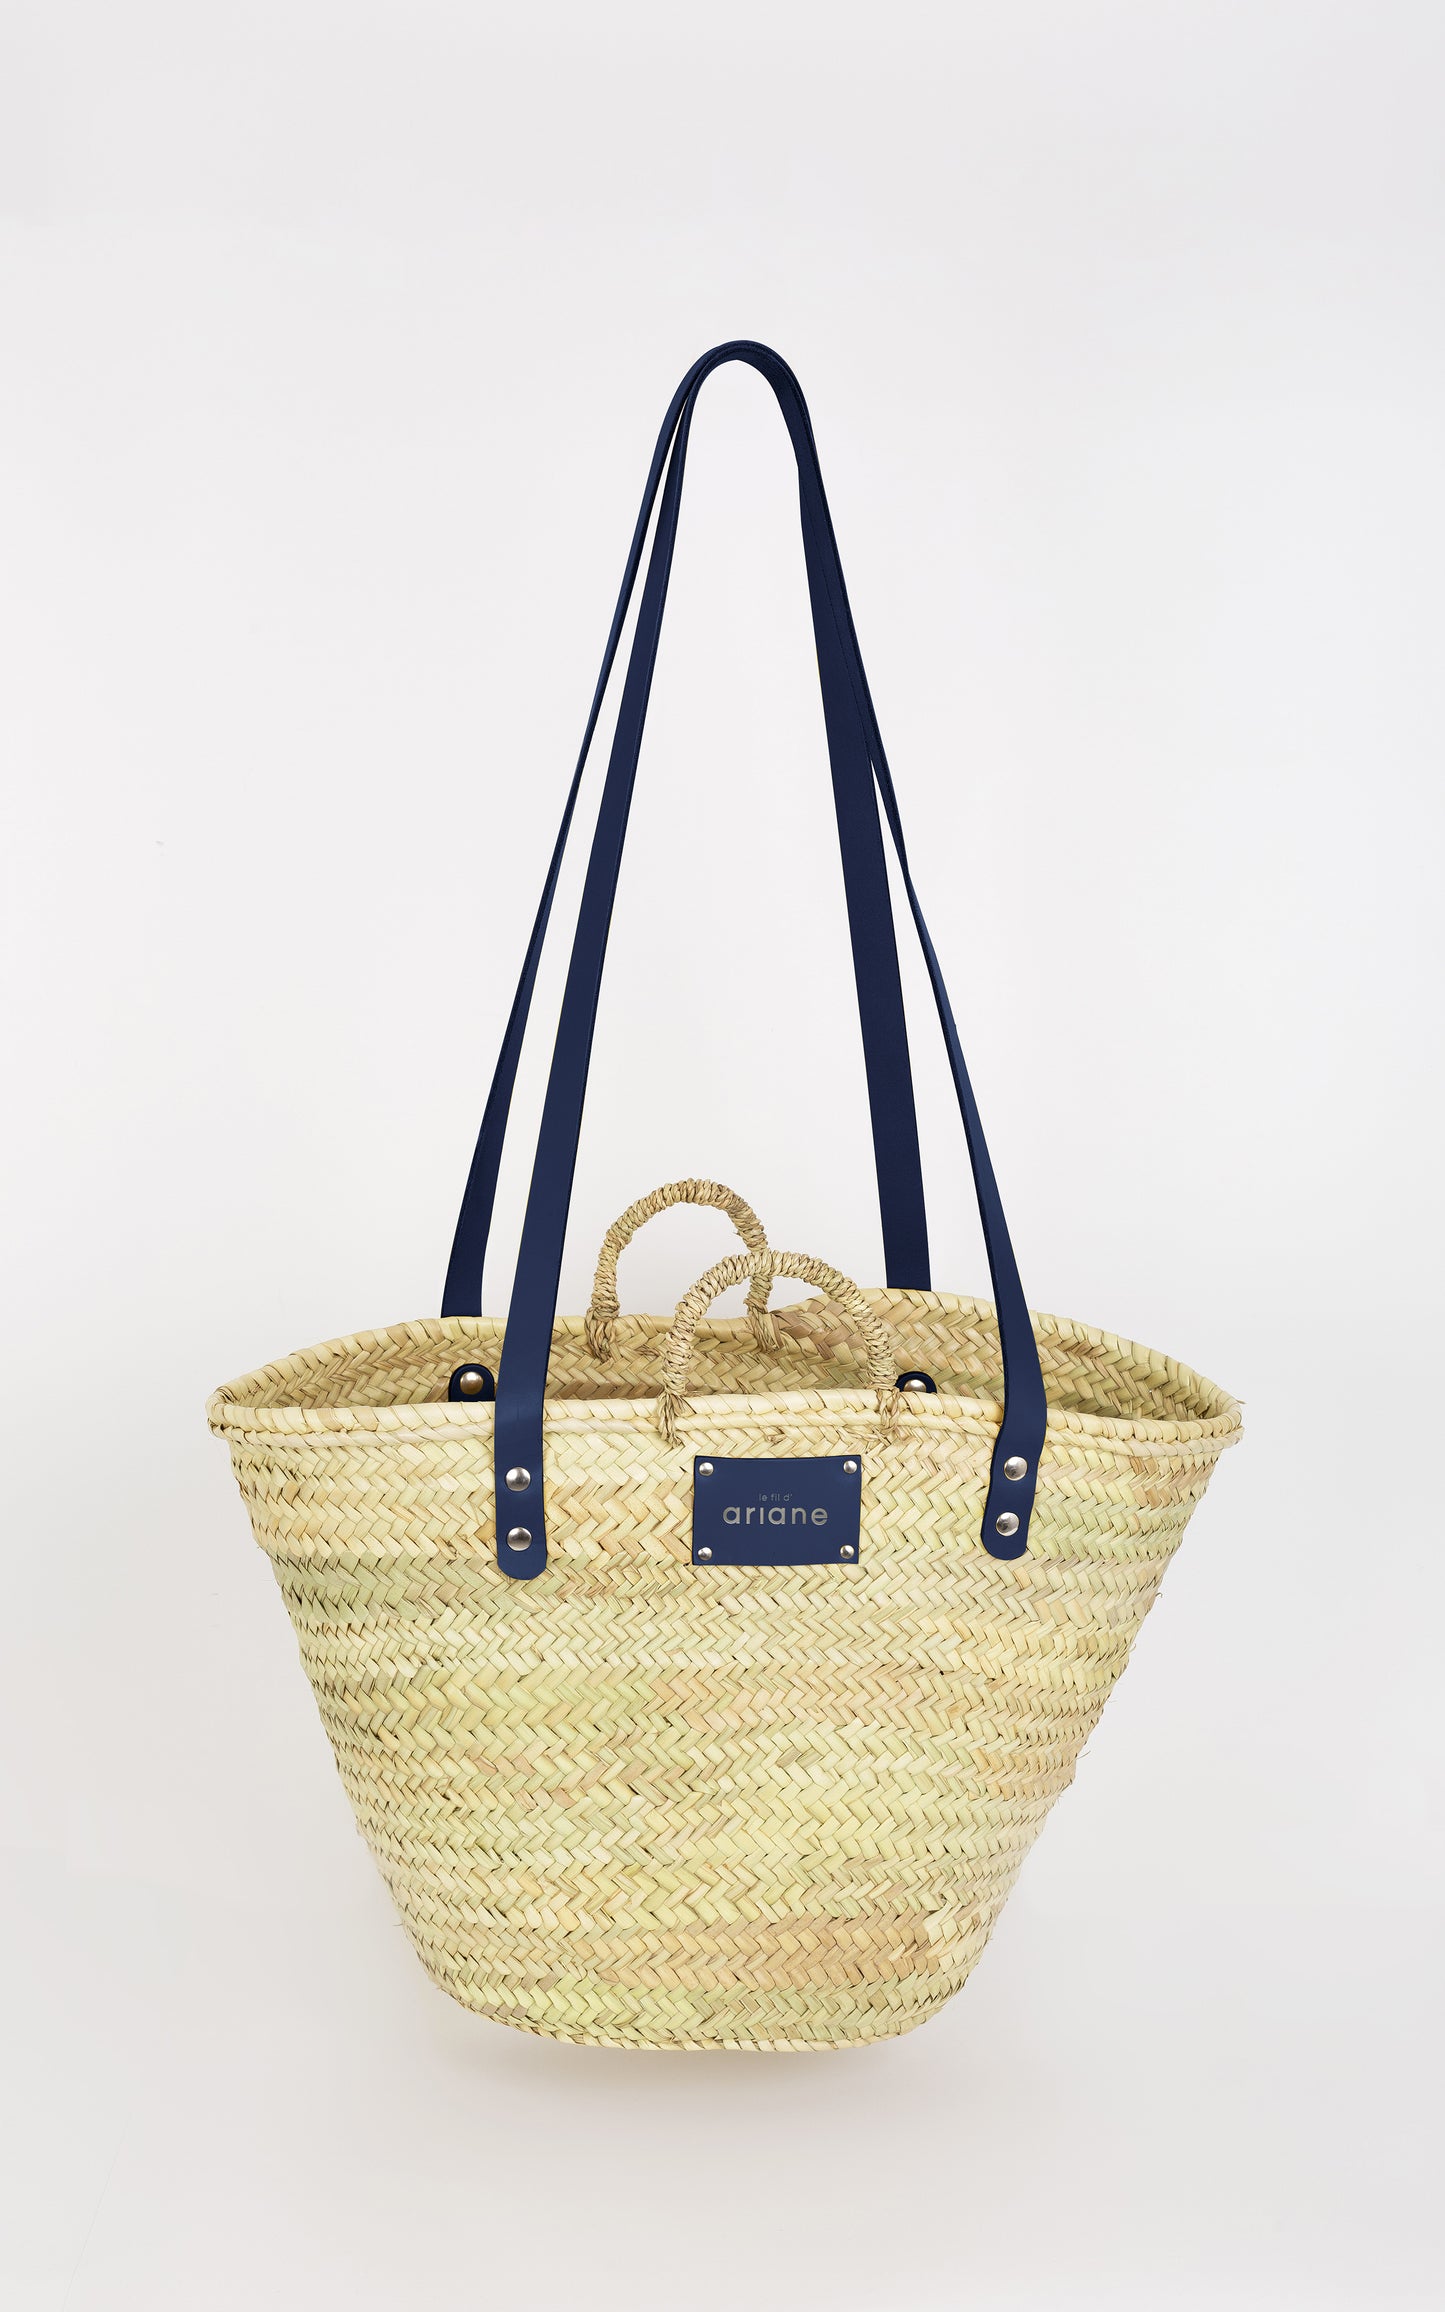 Panier THESEE - Taille L - Anses larges bleu jean